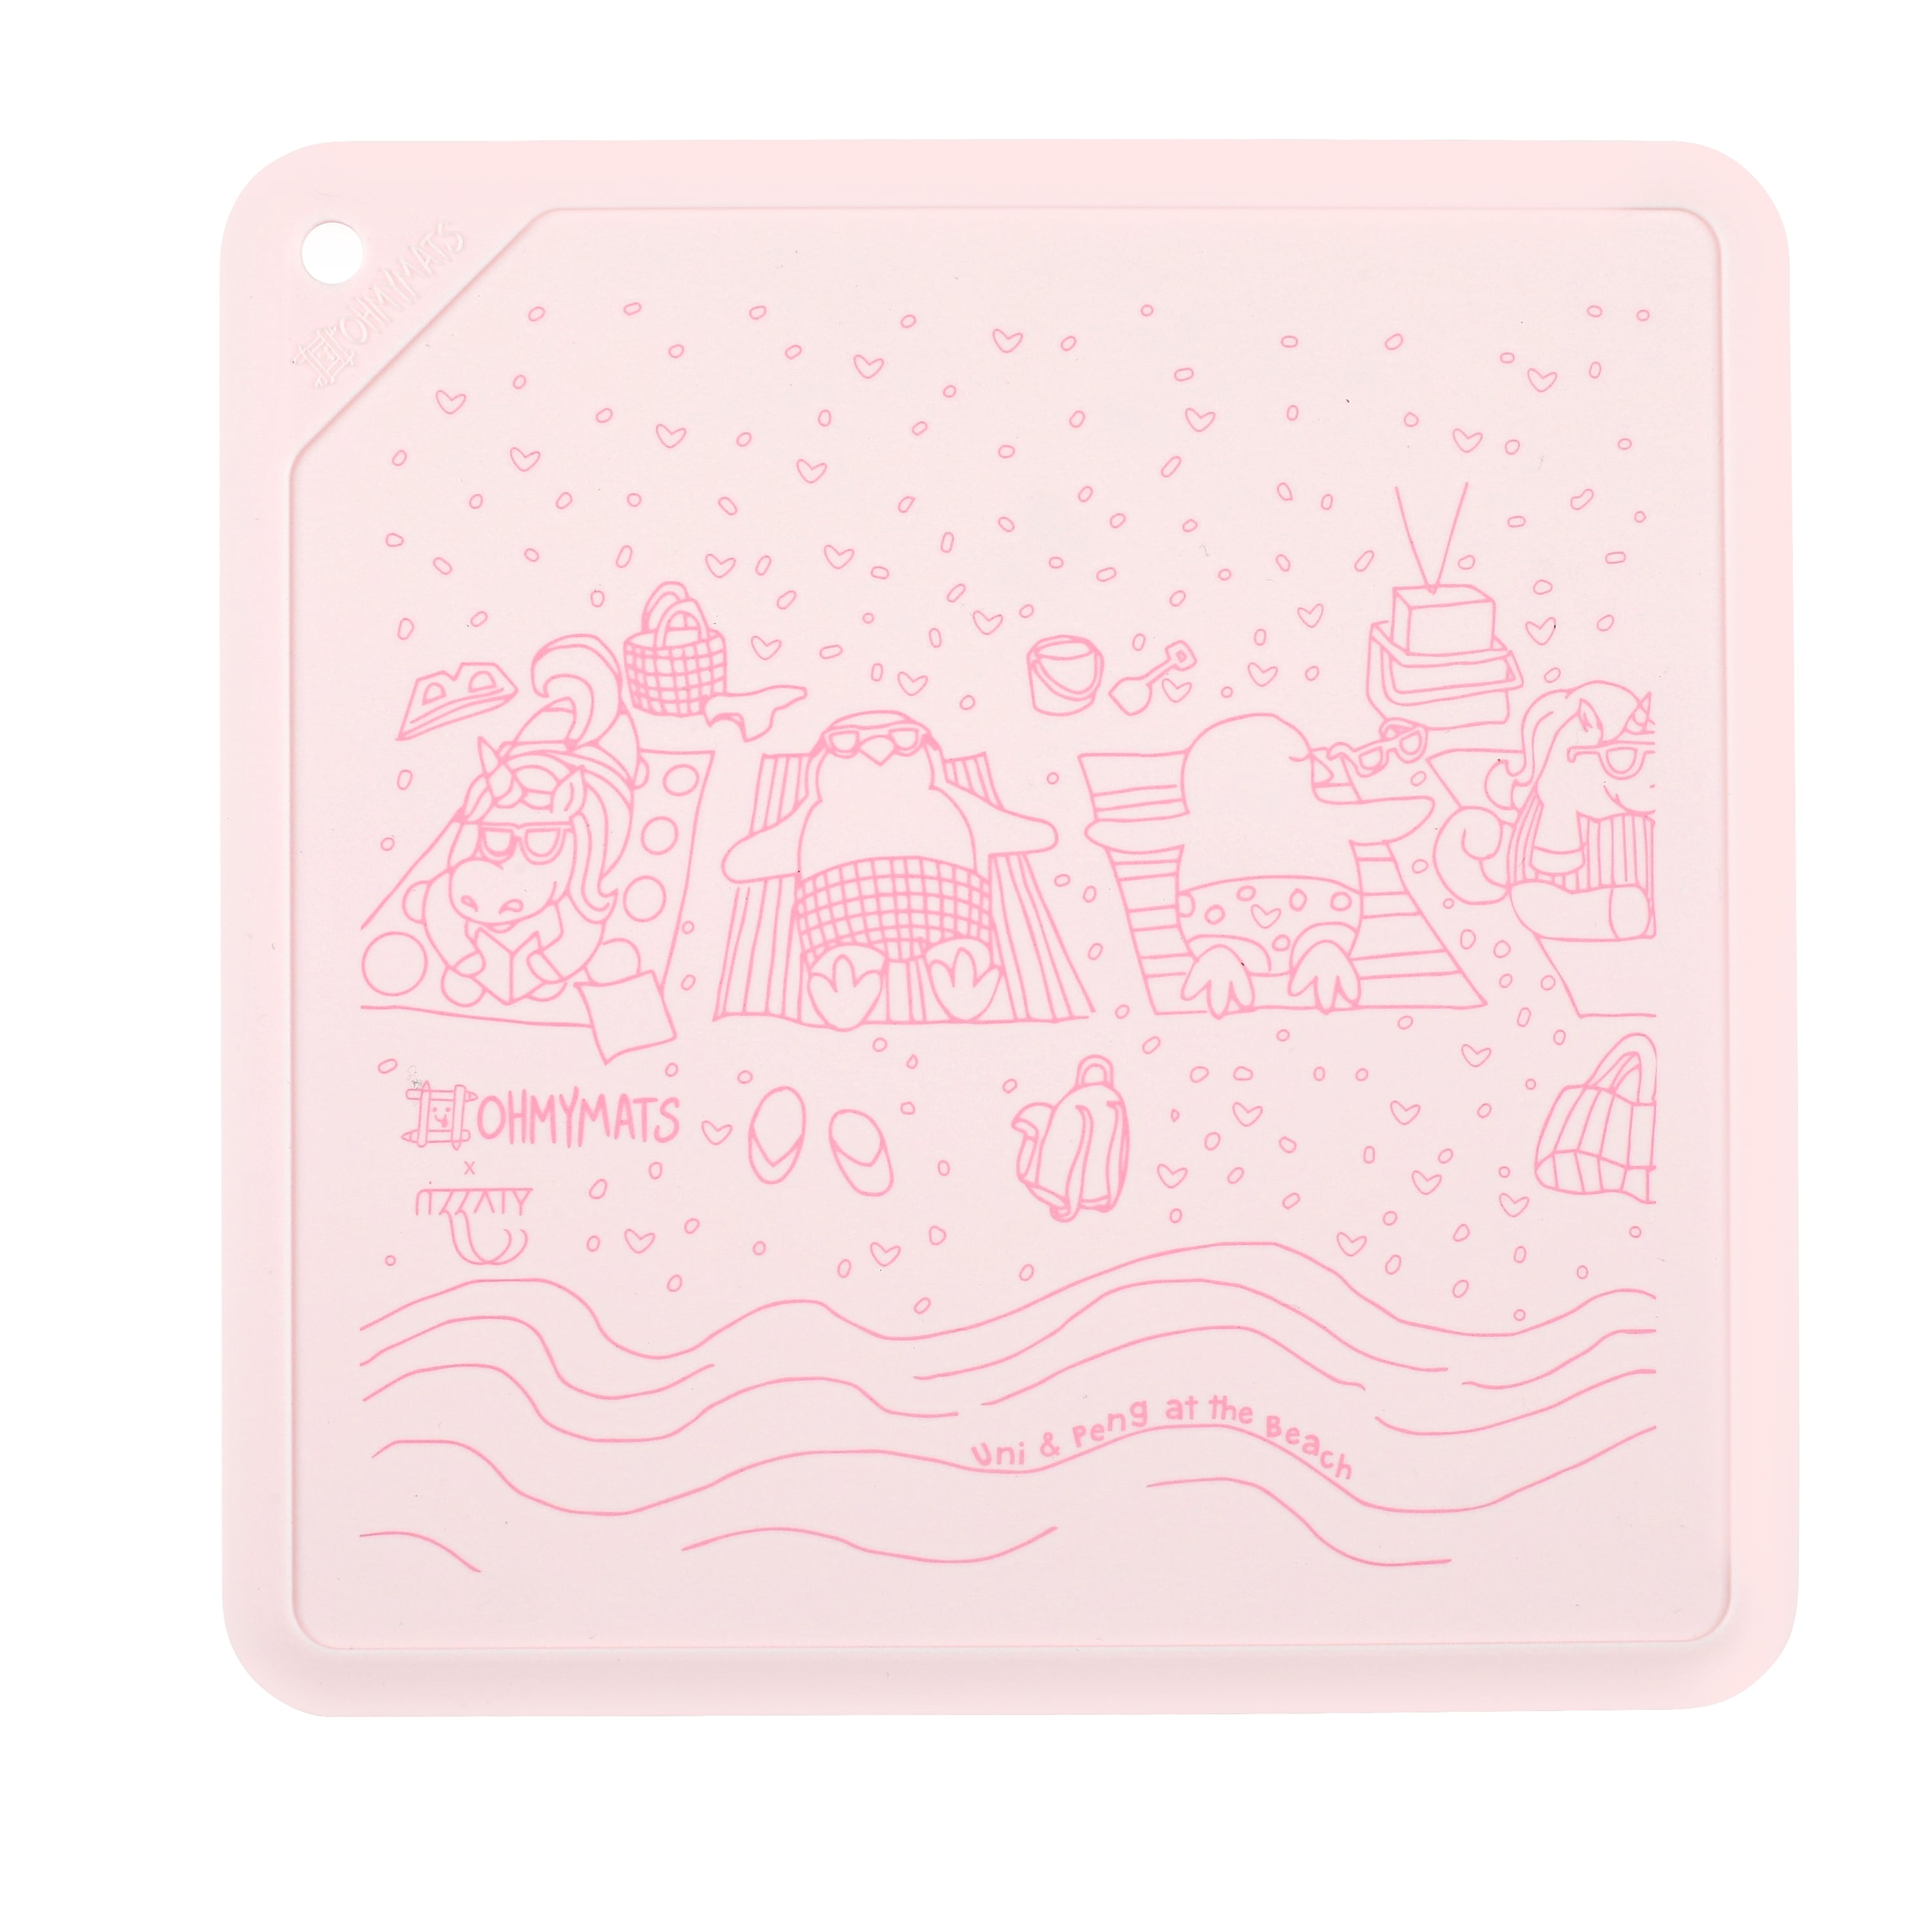 #ohmymats Square Mats - The Pink Series - Uni & Peng at The Beach